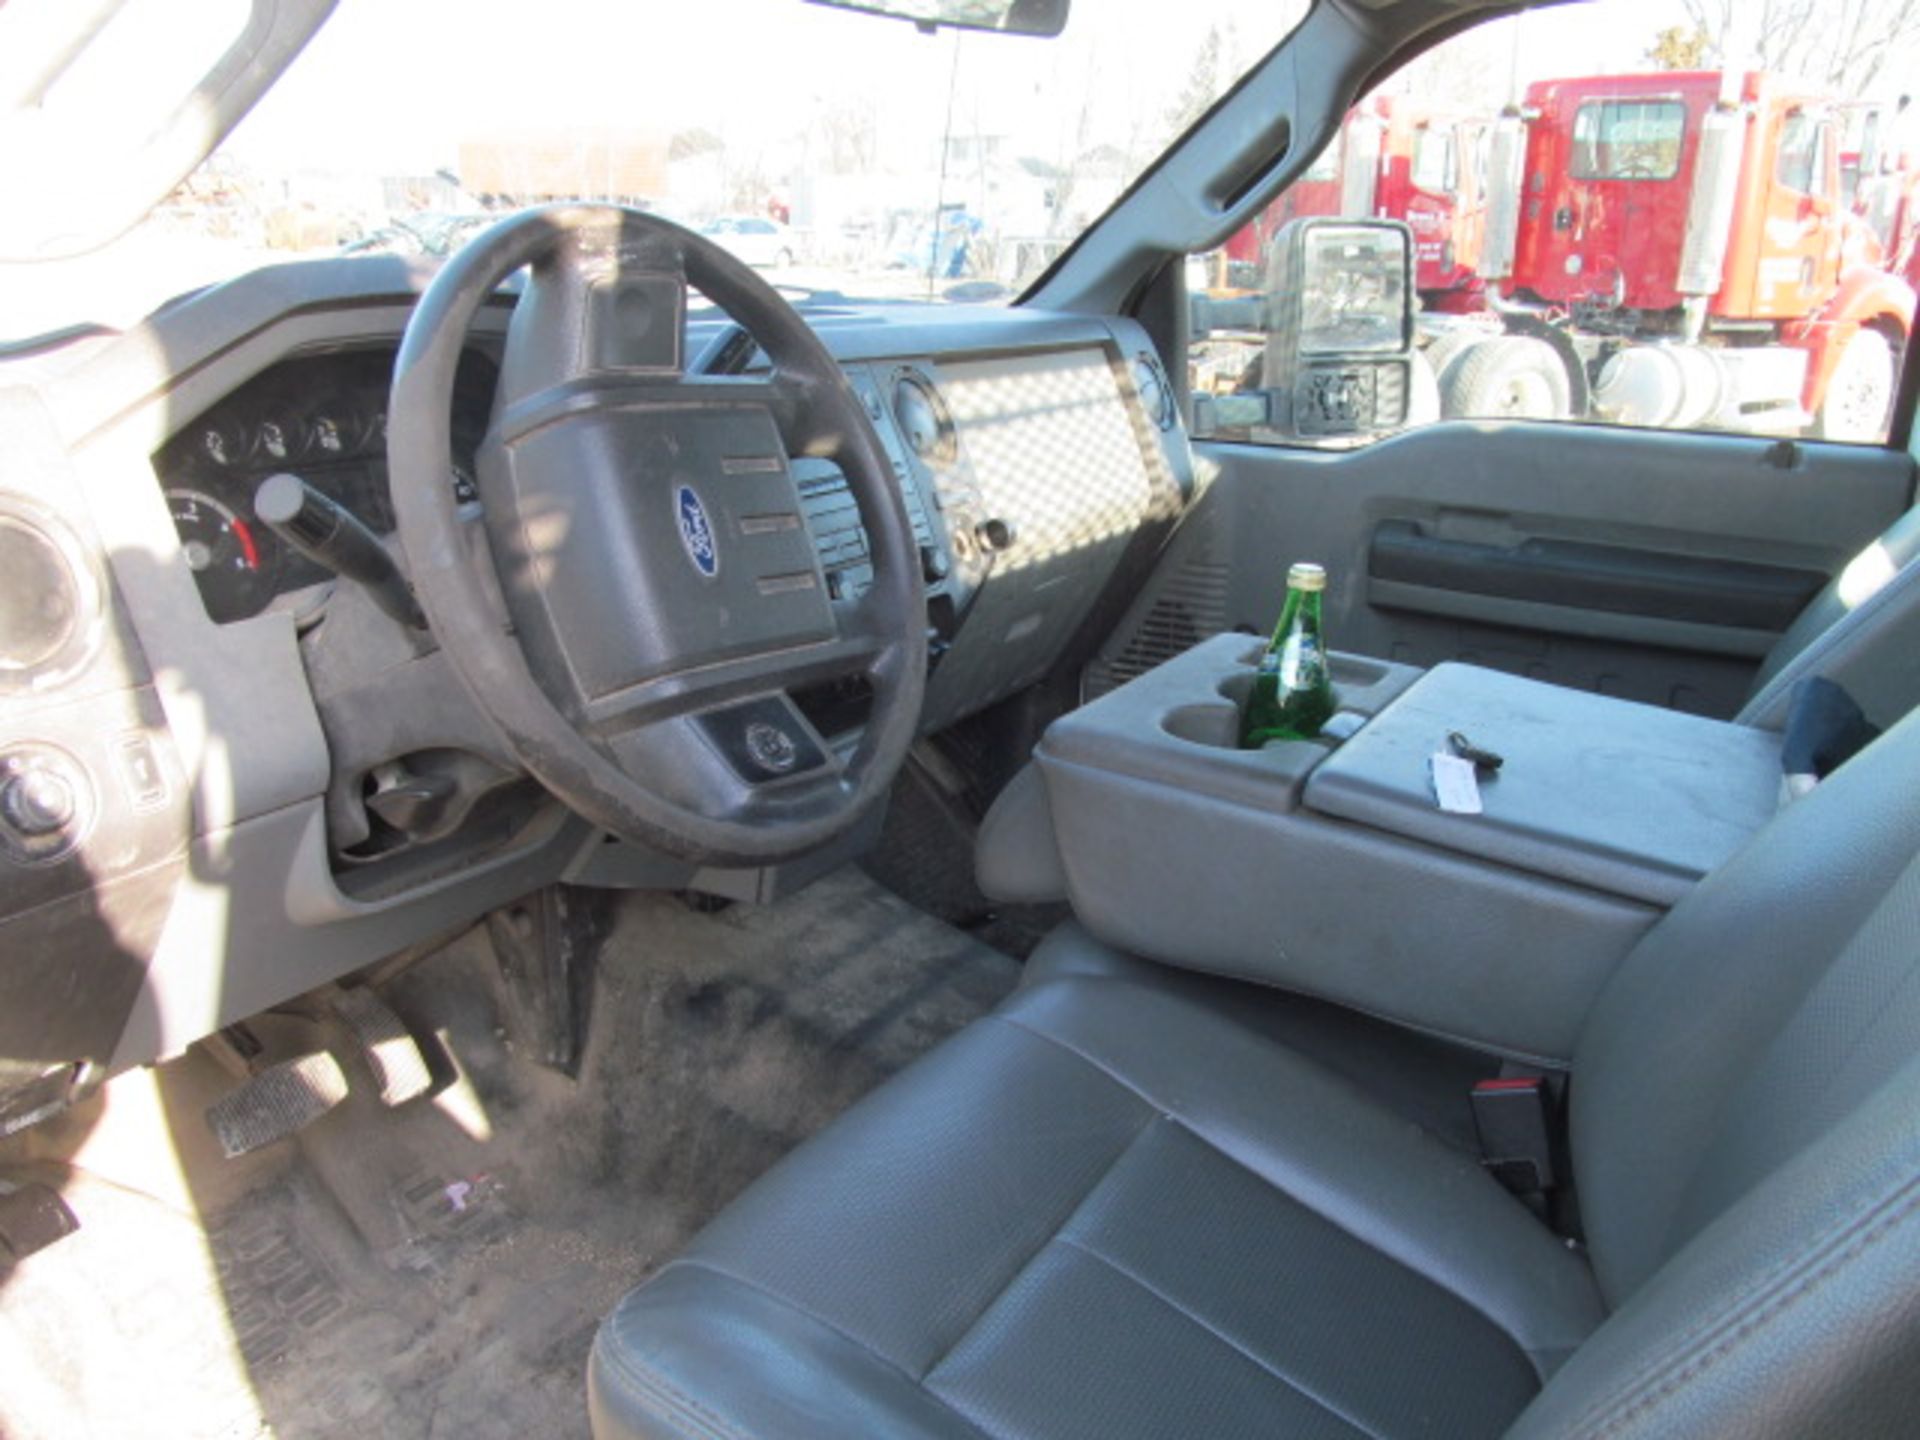 2012 Ford F450 Stakebed Truck with Lift Gate (VIN: 1FDUFGT0CEB54699) [Estimated Mileage: 105698. - Image 4 of 4